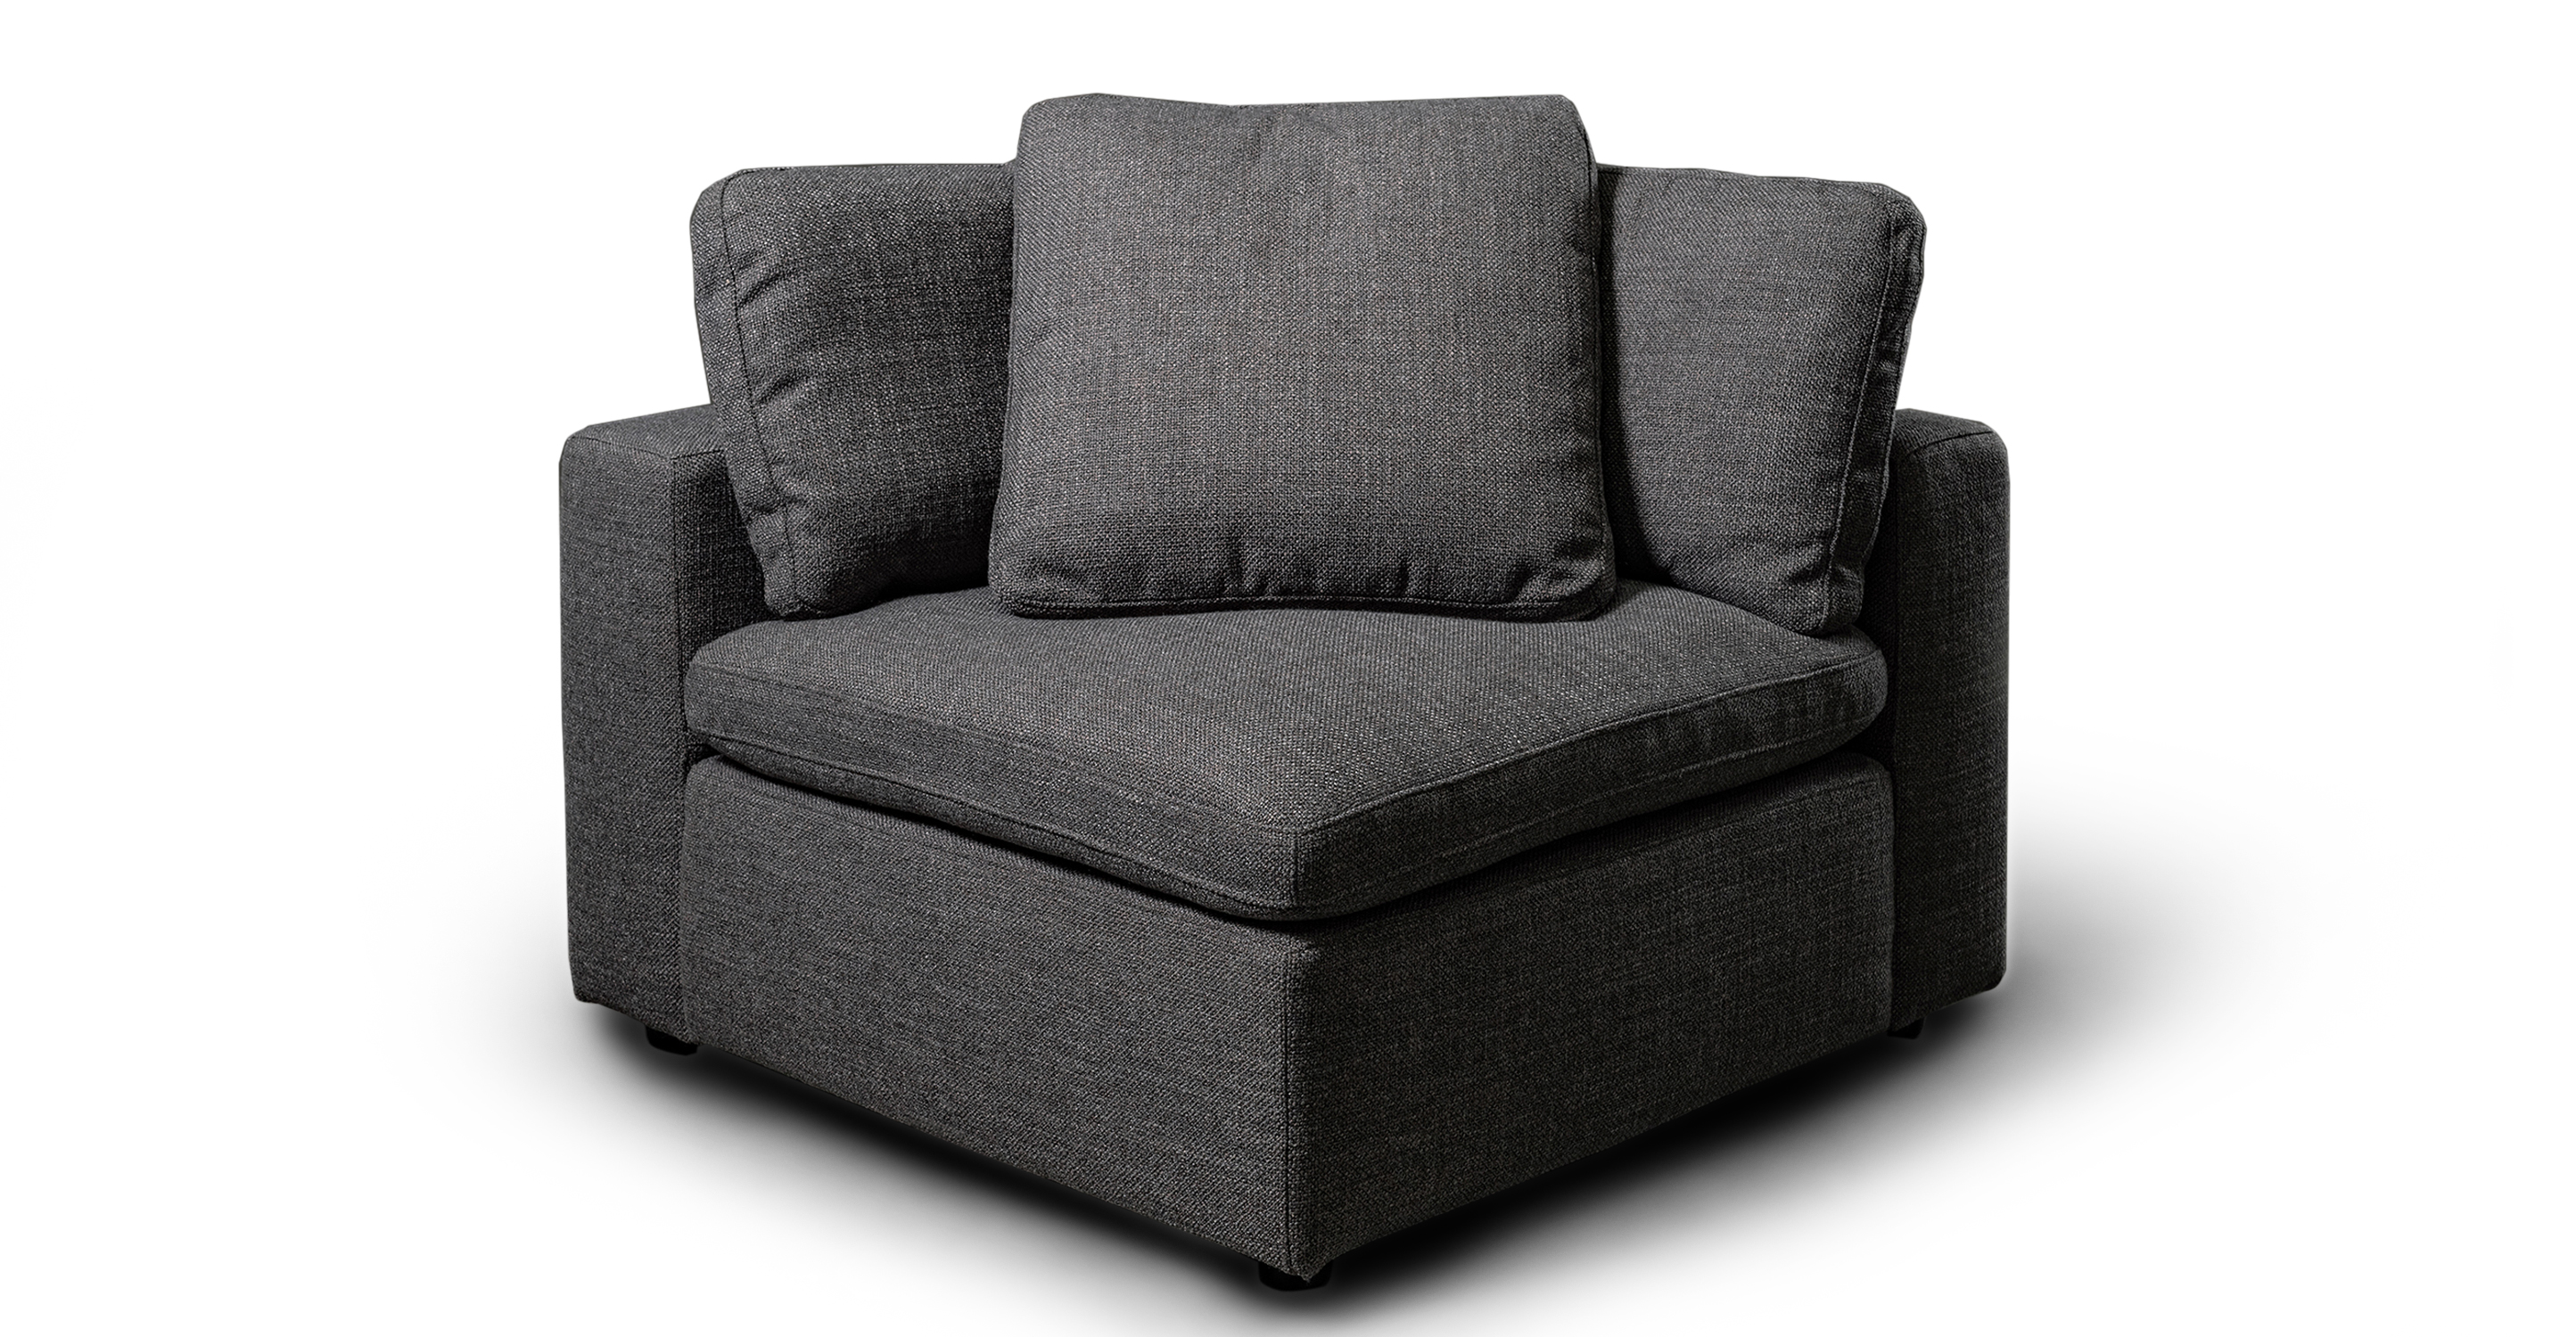 Nest series component Corner chair. Modern corner chair, 100% upholstered, 2 back cushions, 1 throw cushion, and 1 seat cushion.